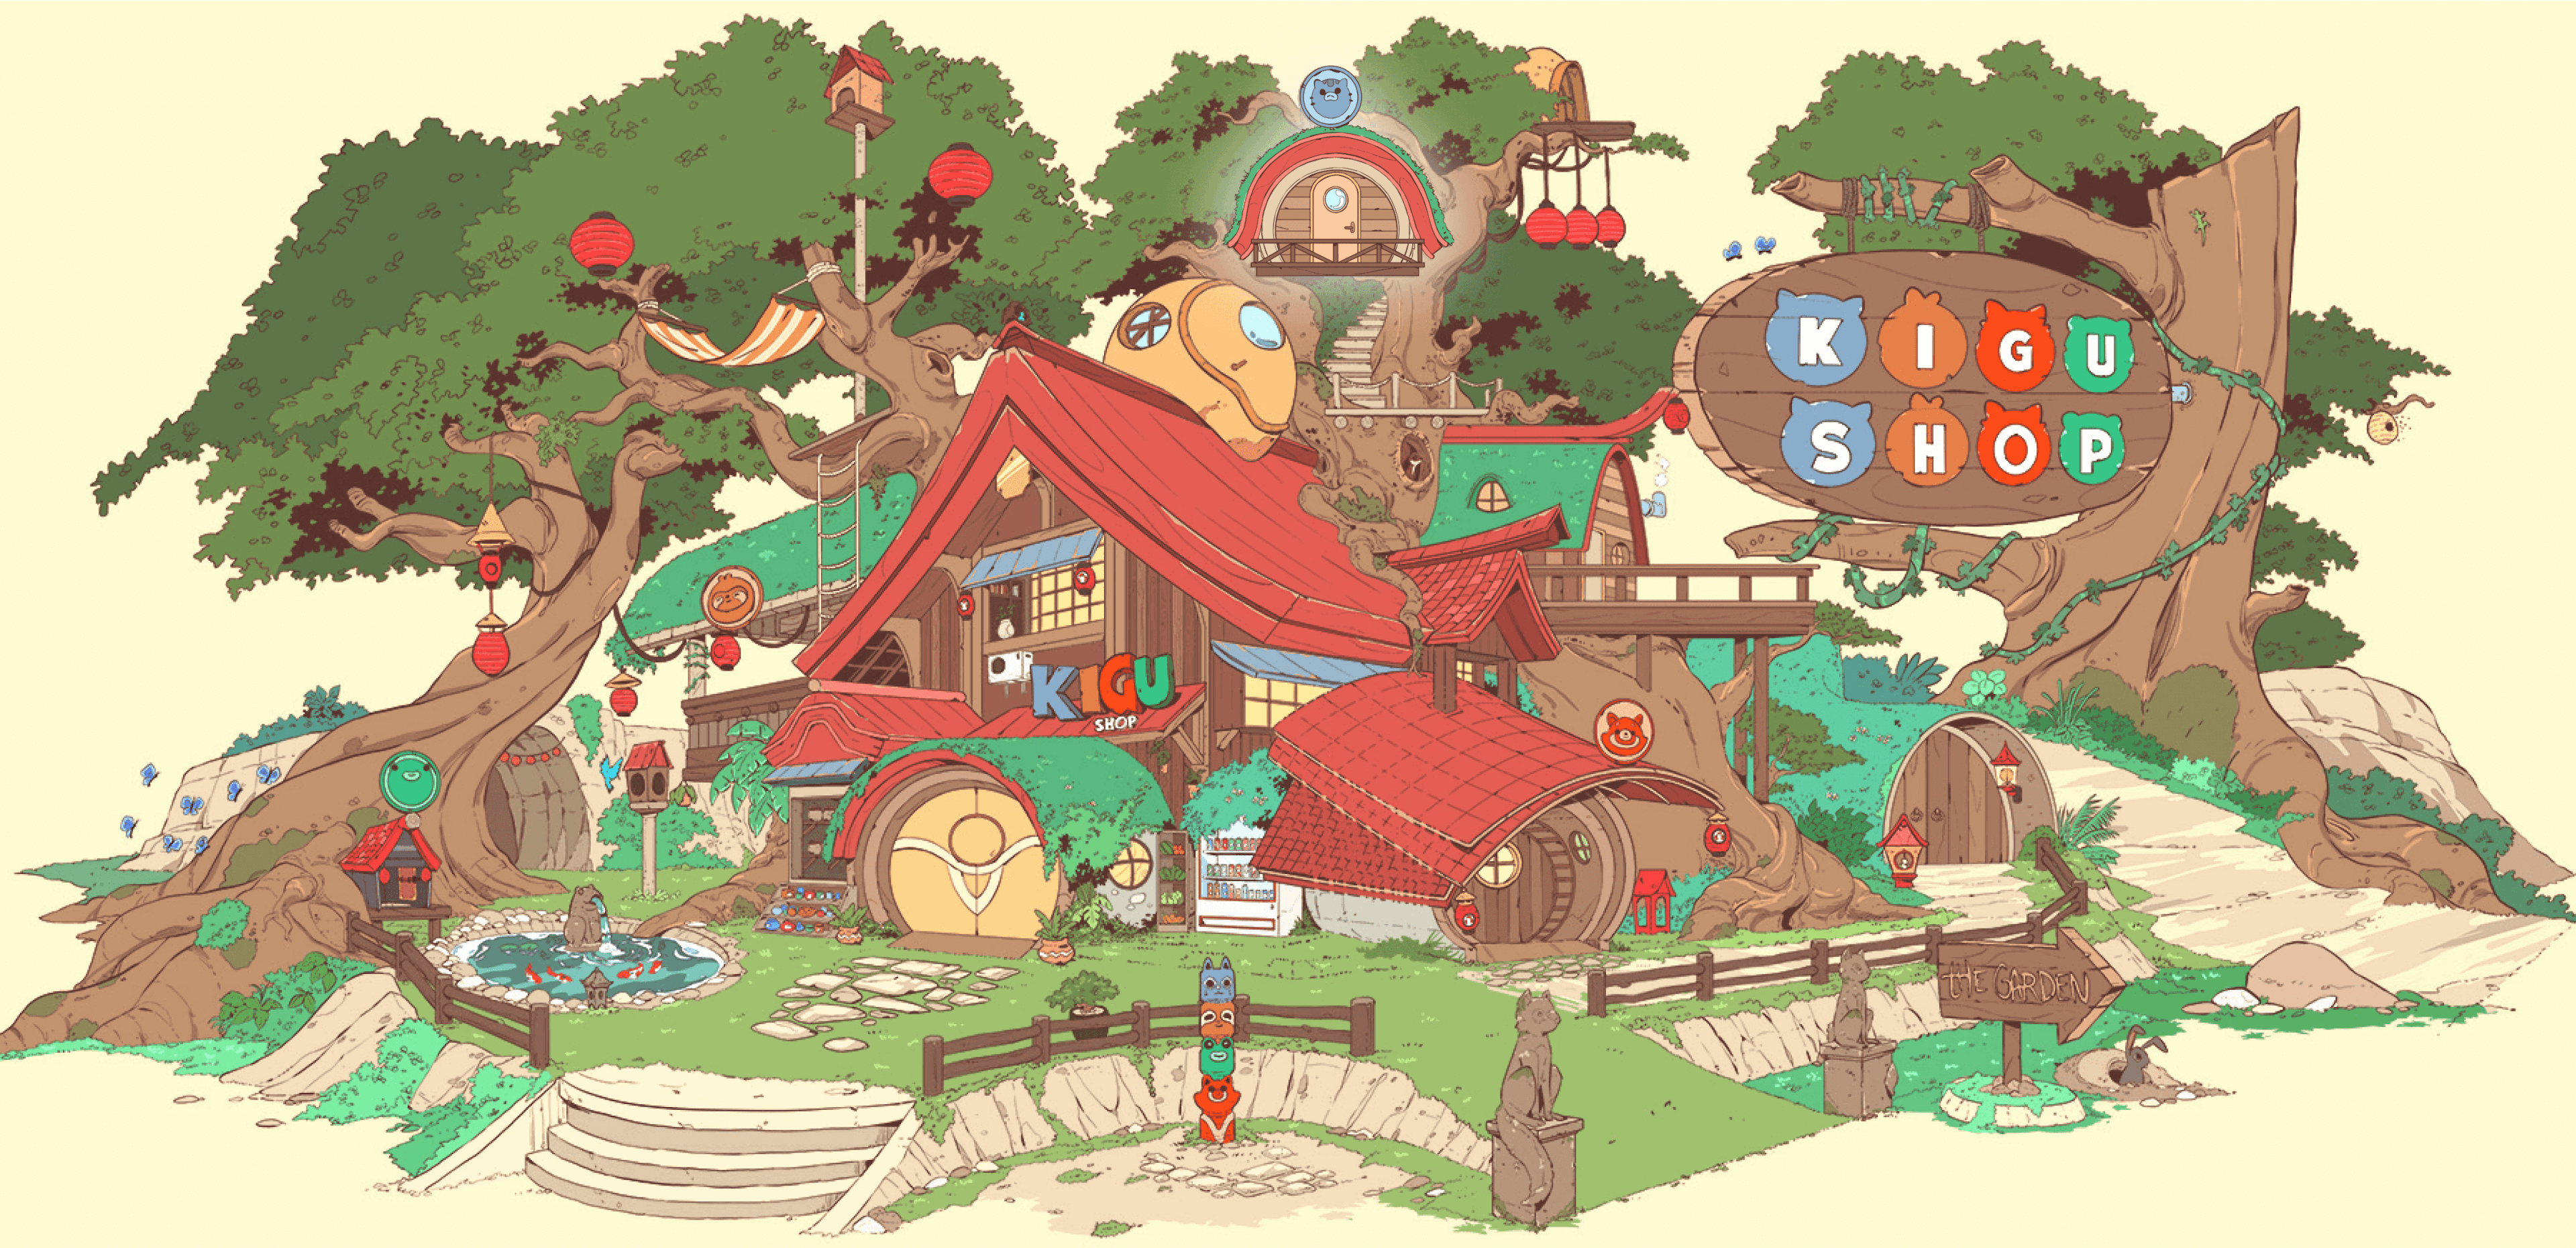 A colorful Kigu cartoon house surrounded by trees, with an adorable tree house nestled among the branches.